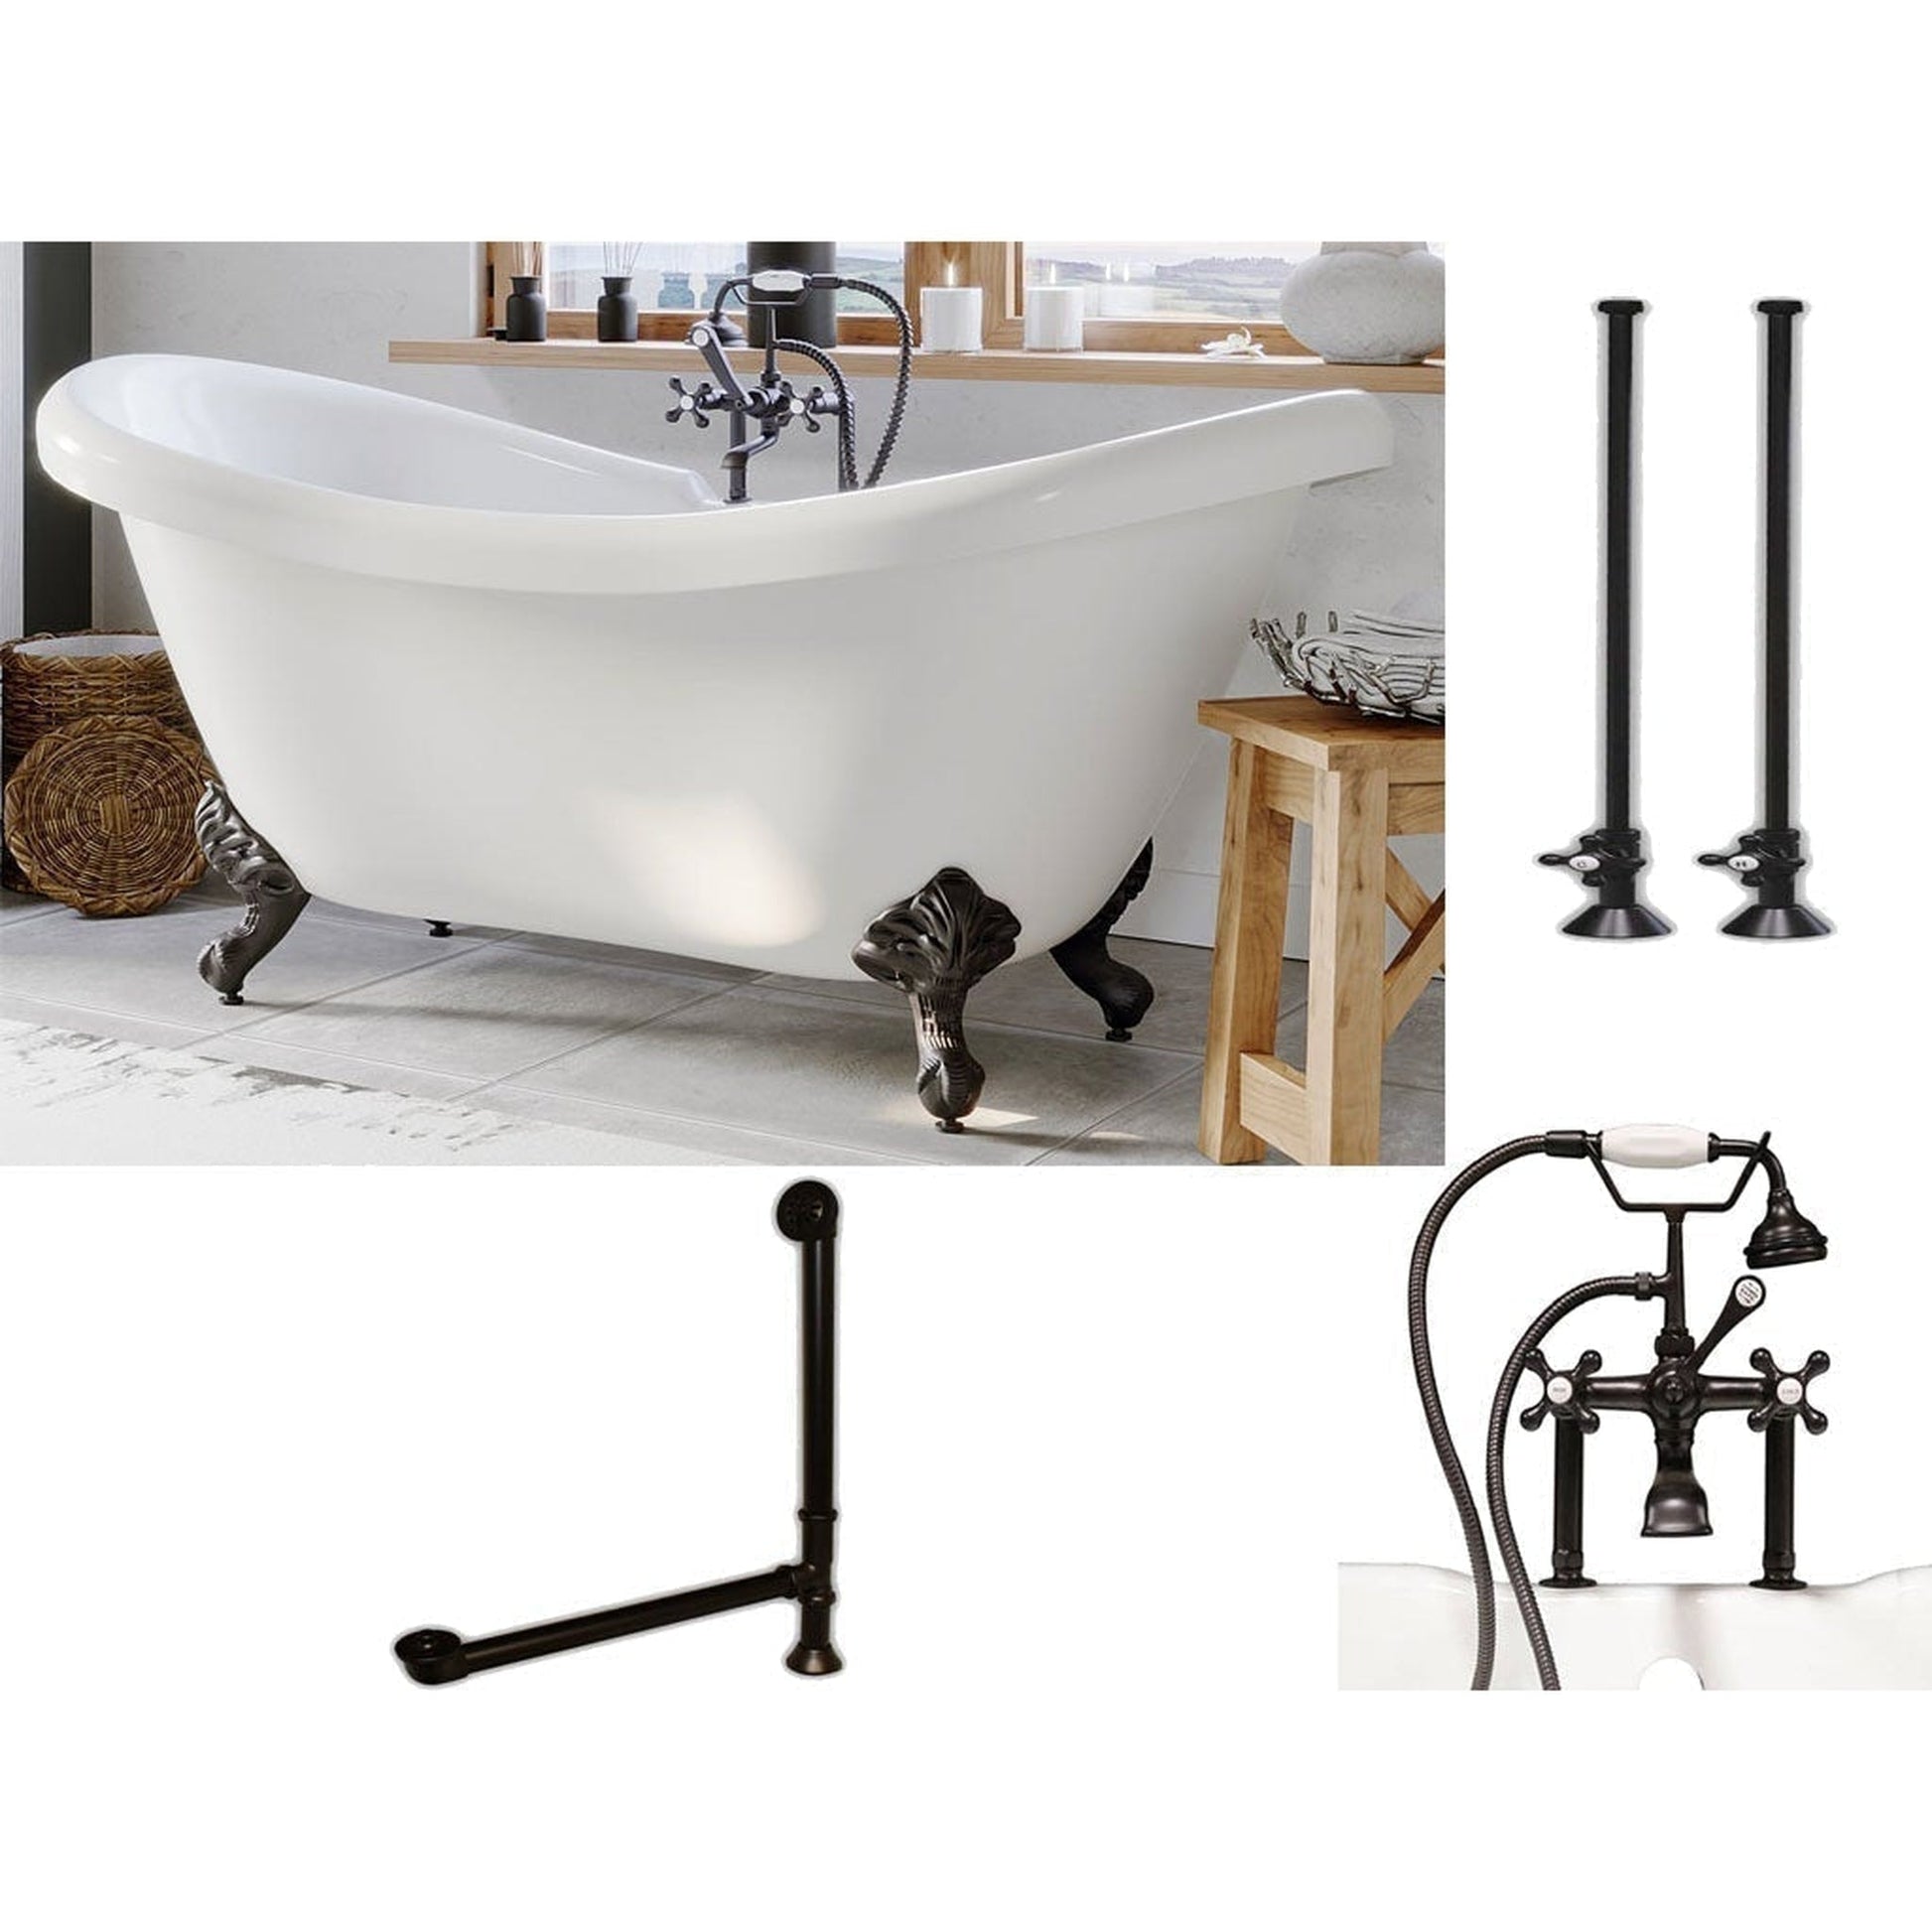 Cambridge Plumbing 69" White Acrylic Double Slipper Clawfoot Bathtub With Deck Holes And Complete Plumbing Package Including 6” Riser Deck Mount Faucet, Supply Lines, Drain And Overflow Assembly In Oil Rubbed Bronze